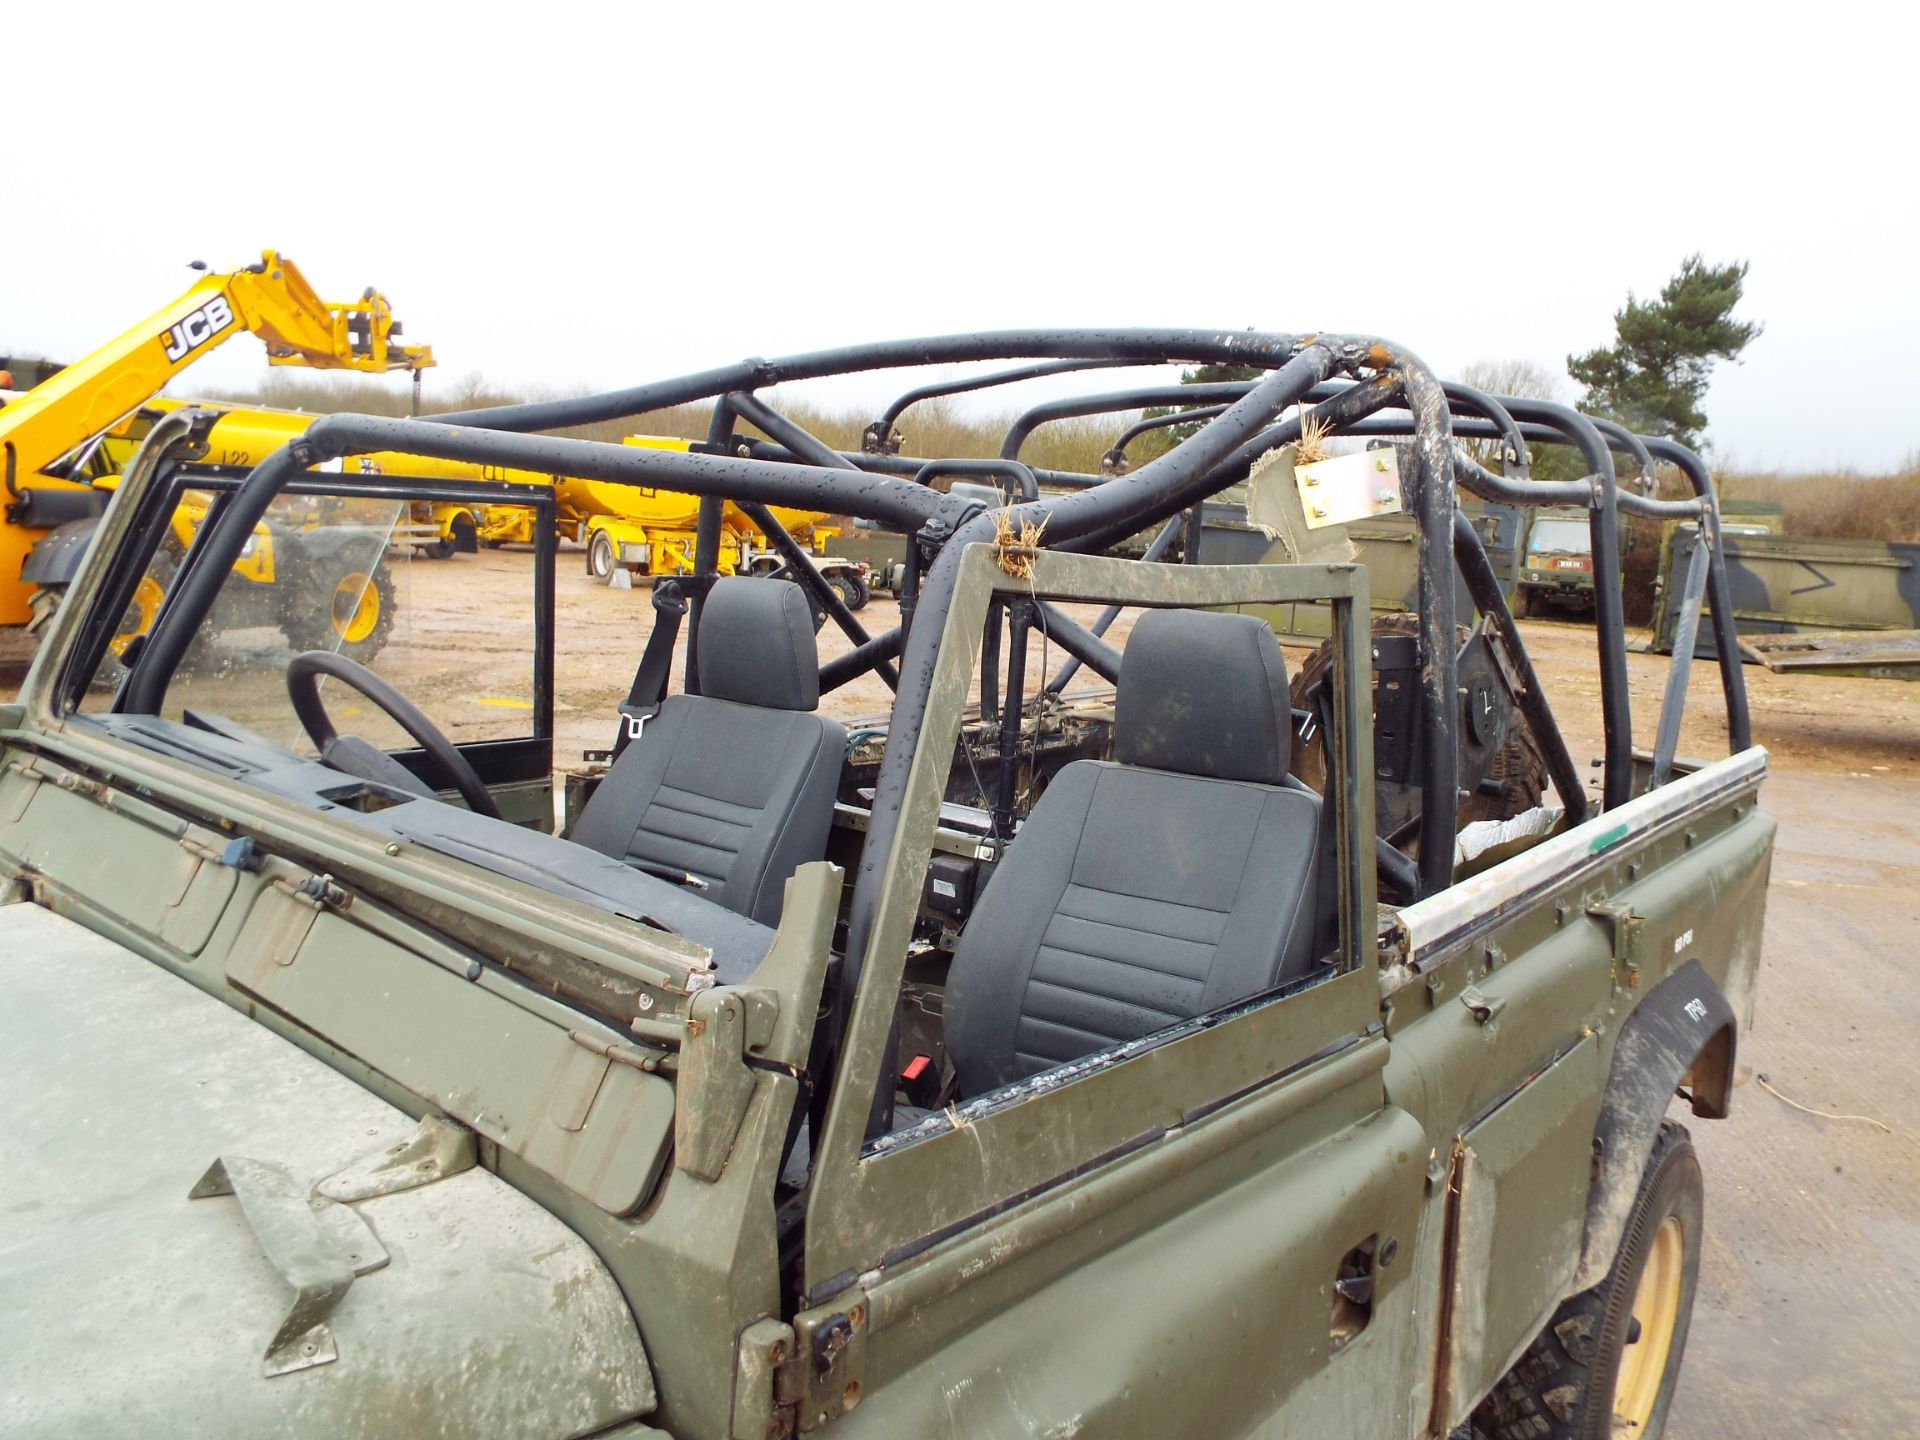 Military Specification Land Rover Wolf 110 Hard Top - Image 21 of 27